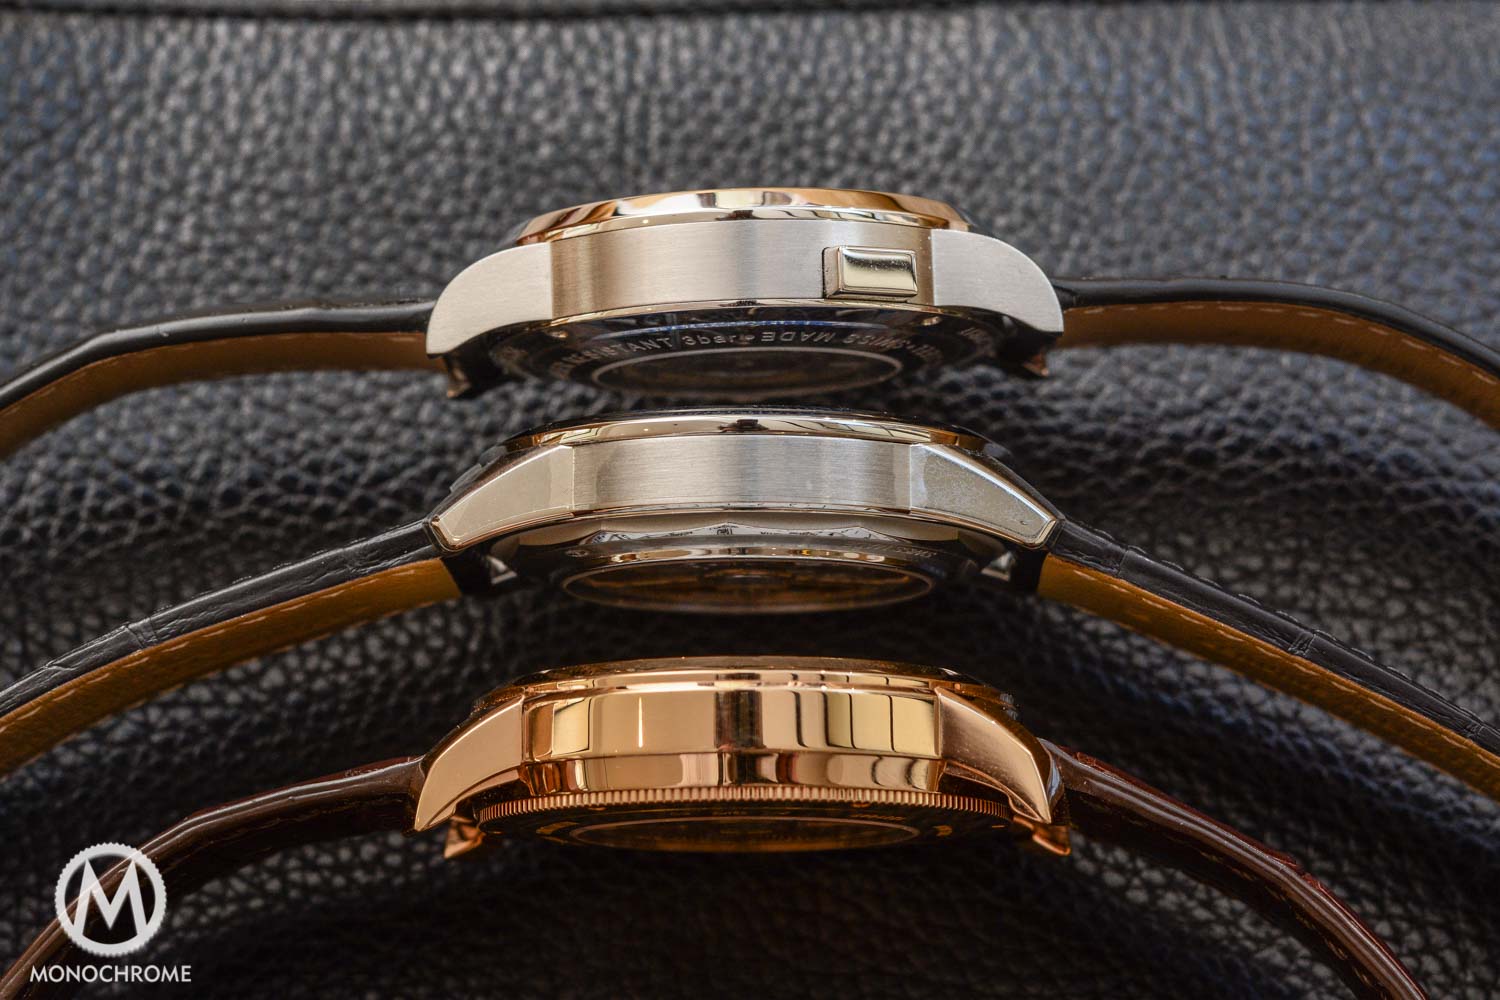 From top to bottom: Montblanc, Jaeger-LeCoultre and Vacheron Constantin